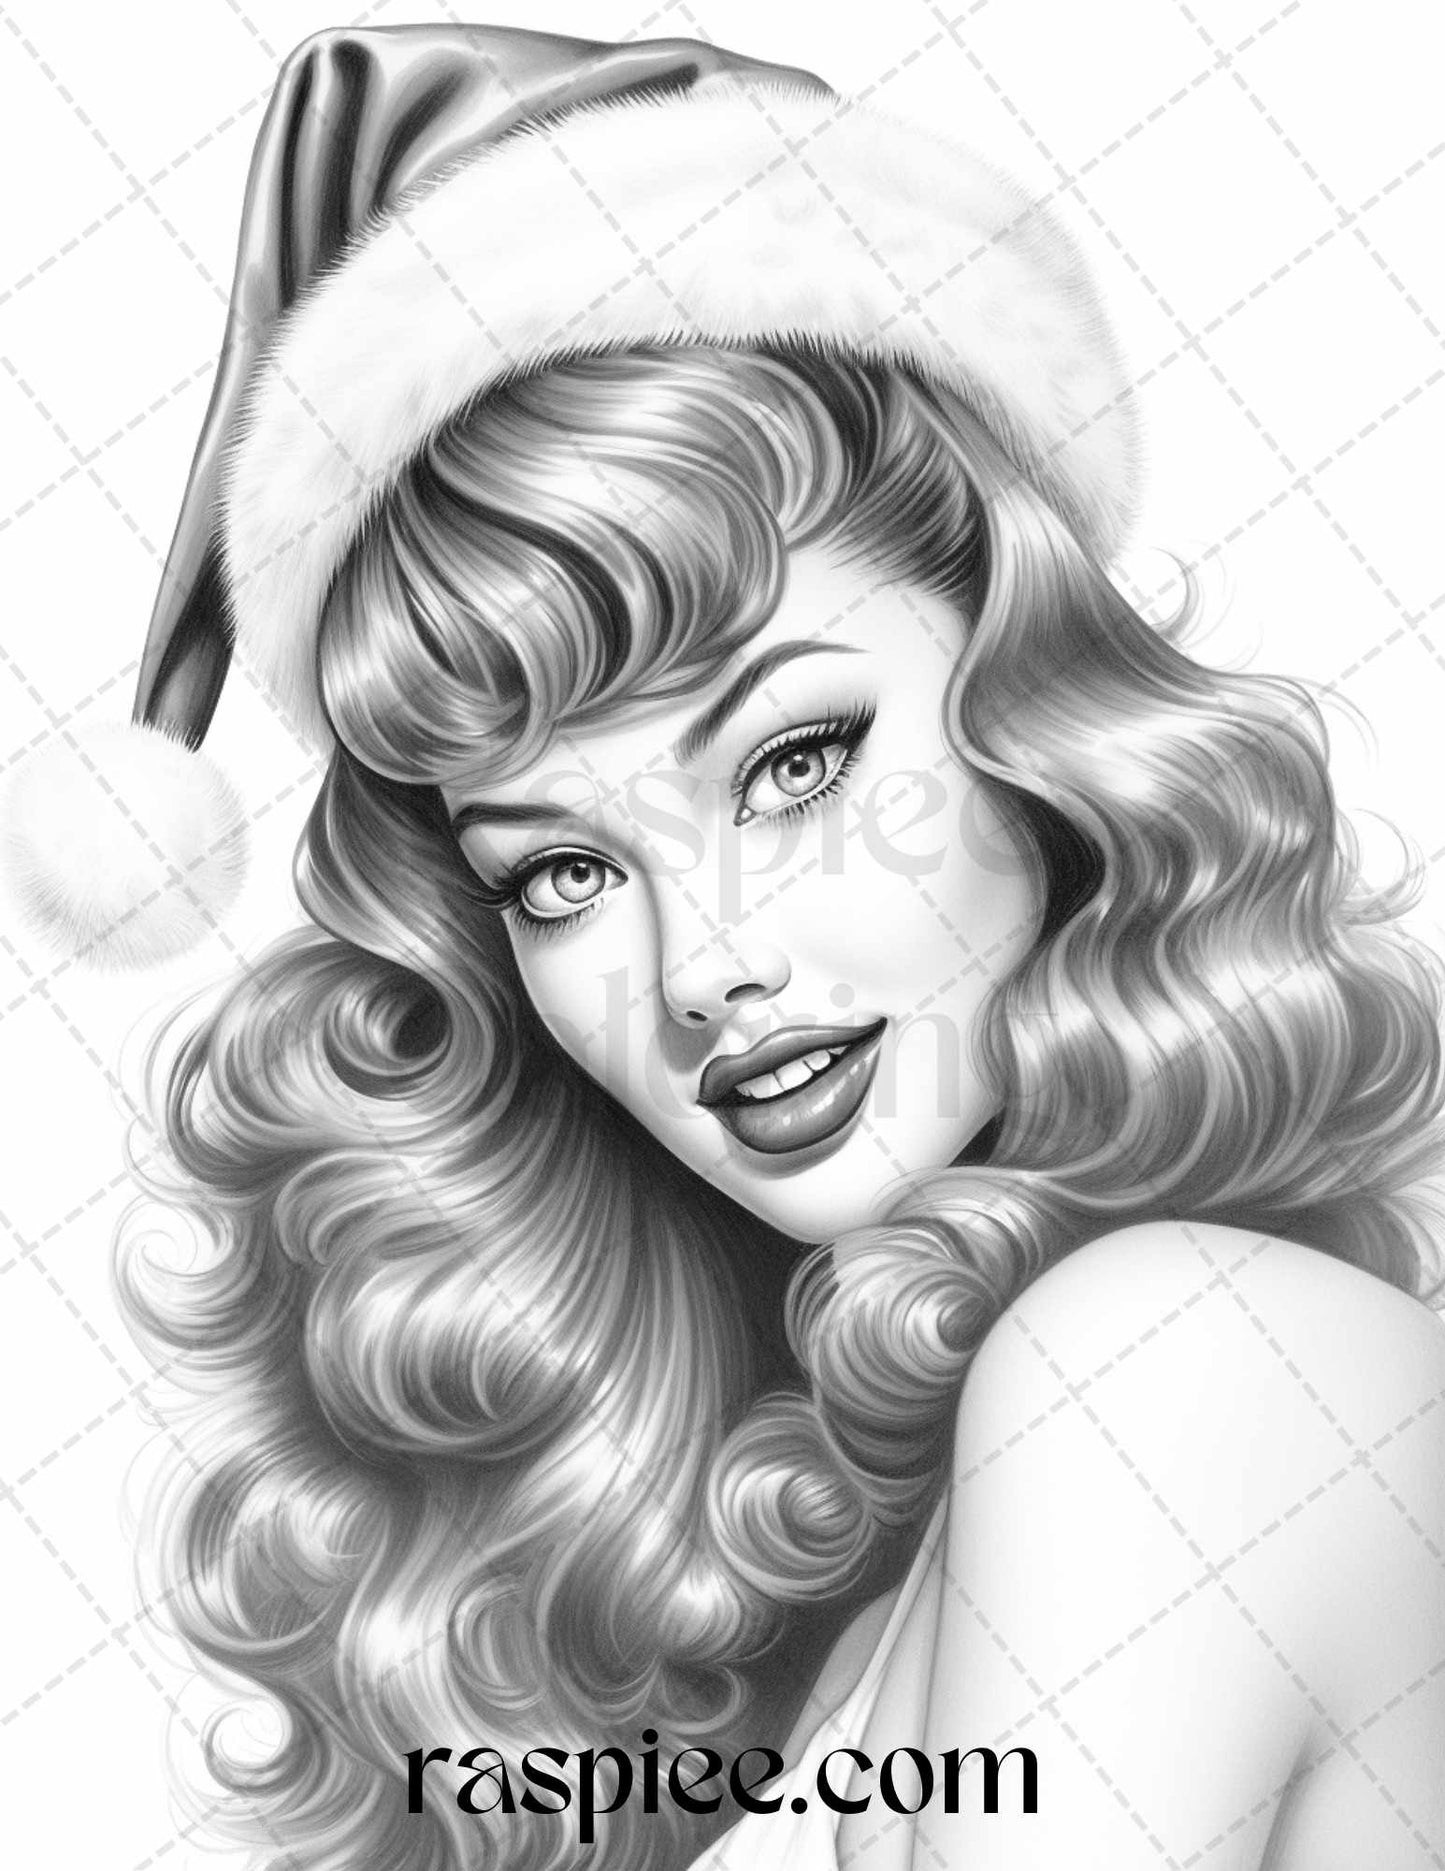 55 Vintage Christmas Pin Up Girls Grayscale Coloring Pages for Adults, Printable PDF File Instant Download